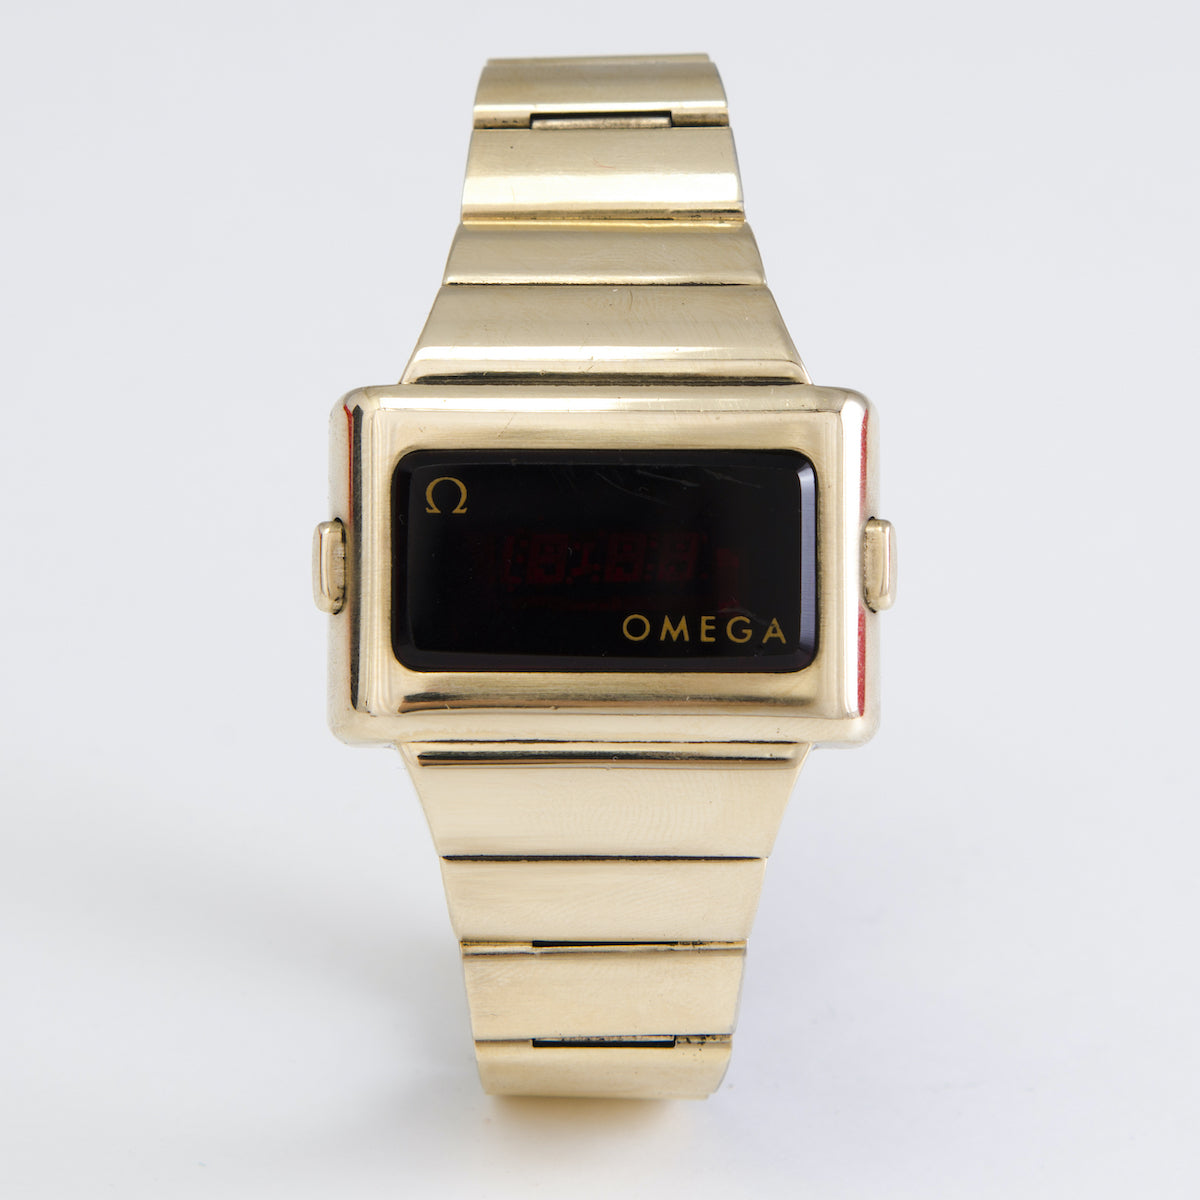 Advances in technology have also given rise to more exotic models, like this Omega Time Computer TC2, a gold-plated digital LED wristwatch.